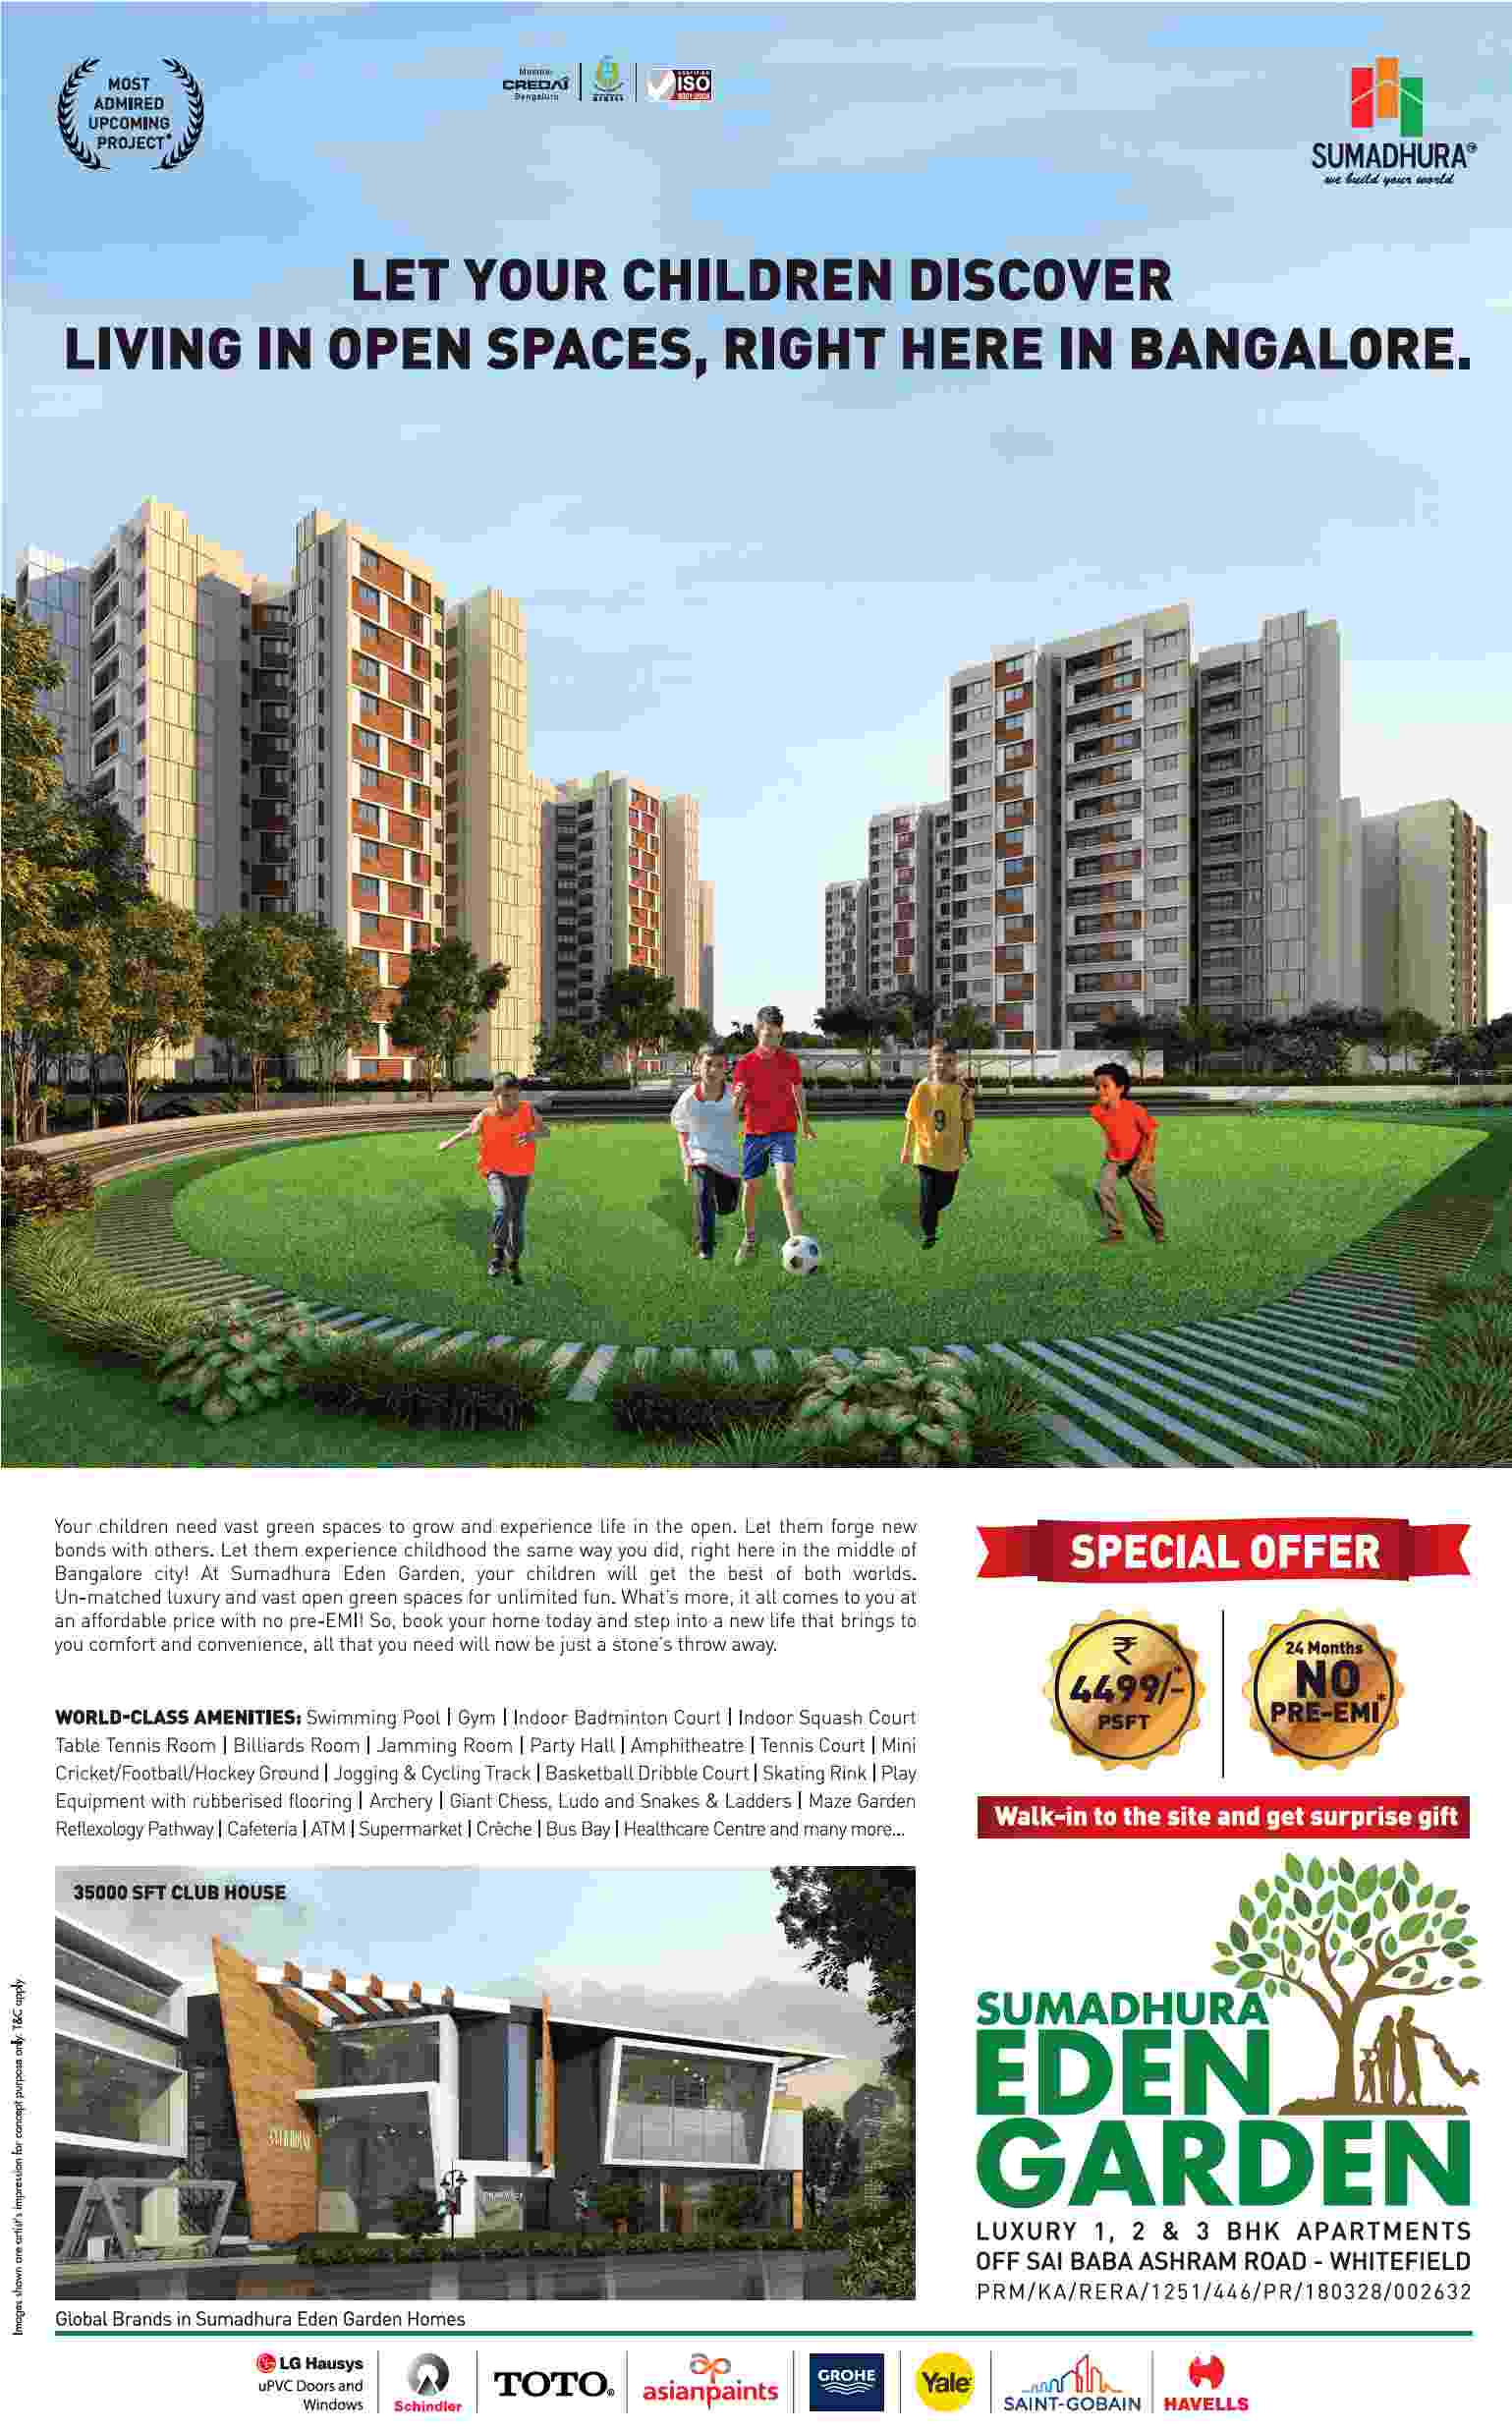 Book home at Rs. 4499 per sq.ft. with no pre-EMI for 24 months at Sumadhura Eden Garden in Bangalore Update